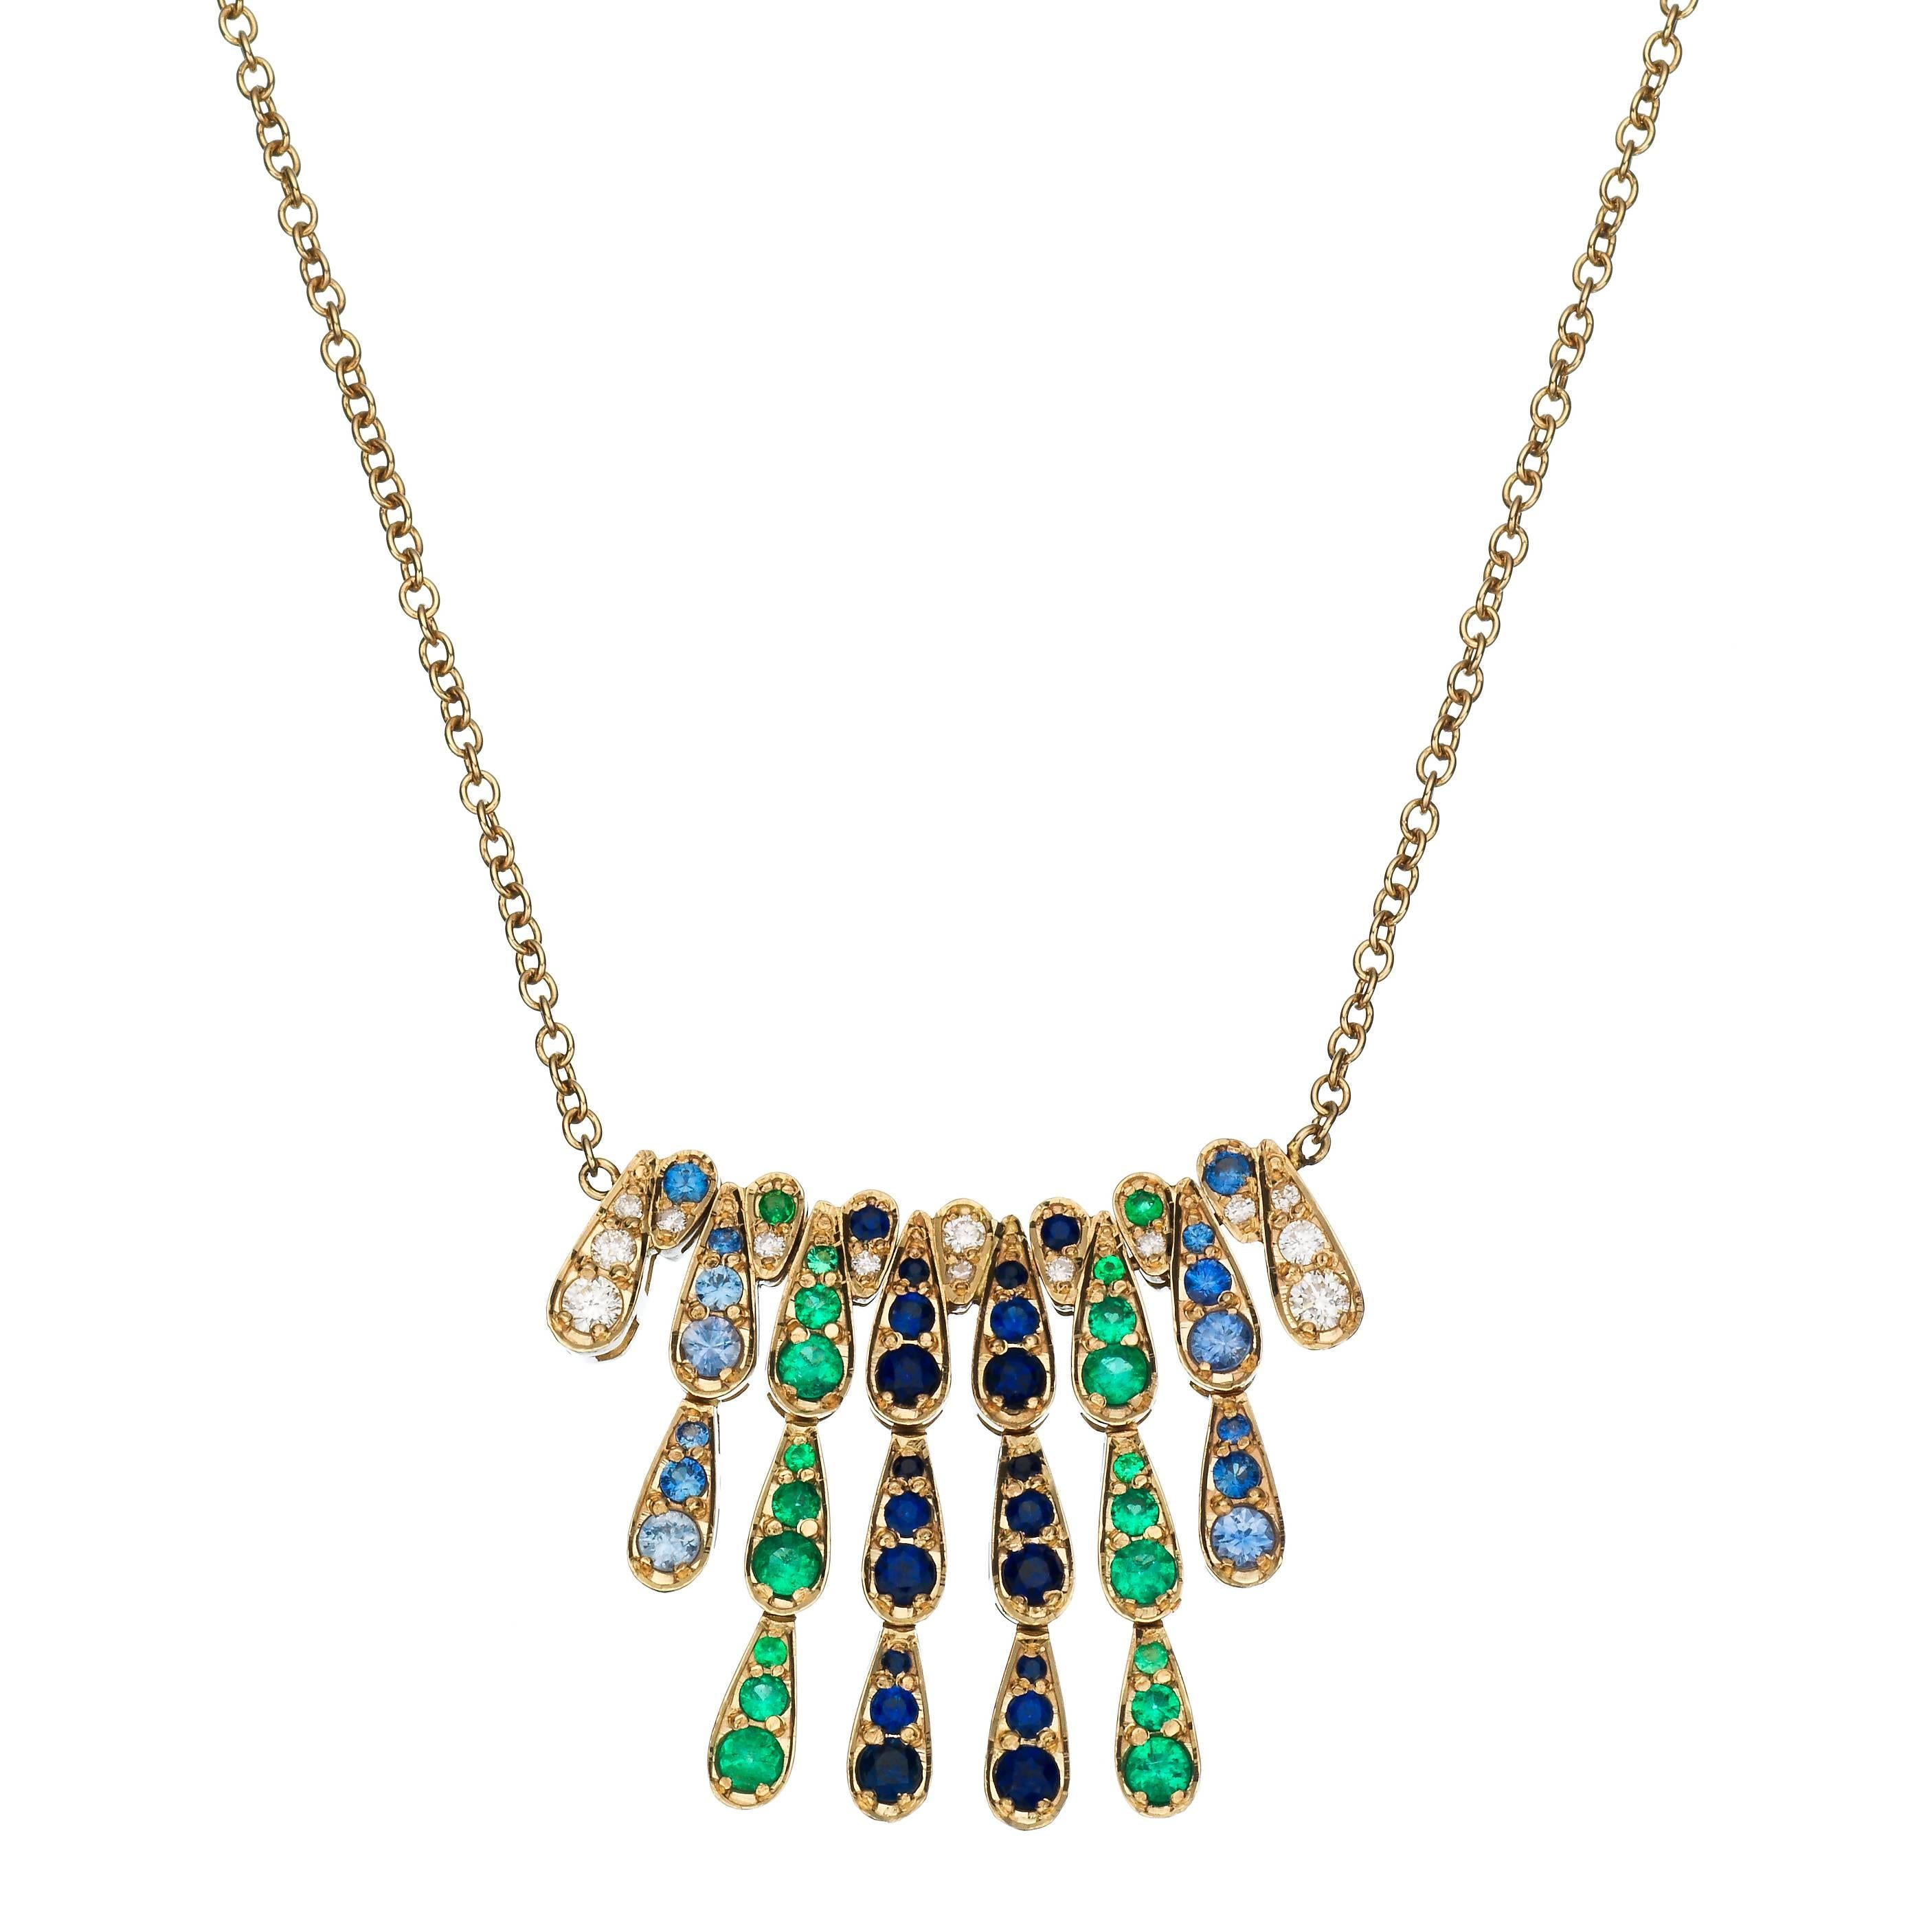 Sabine Getty White Gold Harlequin Necklace with Emerald, Diamond & Blue Sapphire For Sale